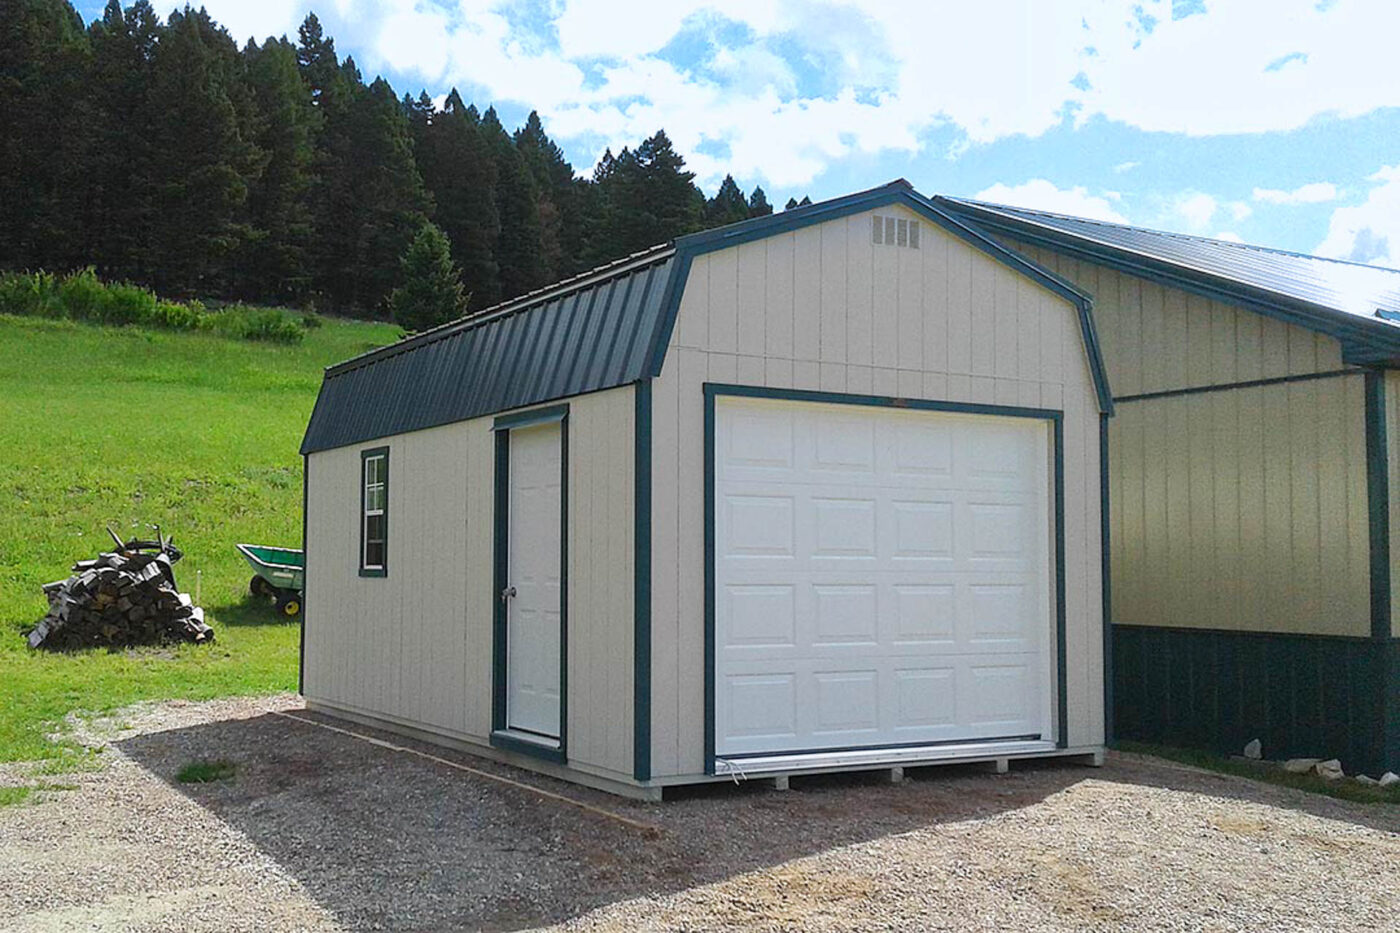 garages for sale in white sulphut springs, mt